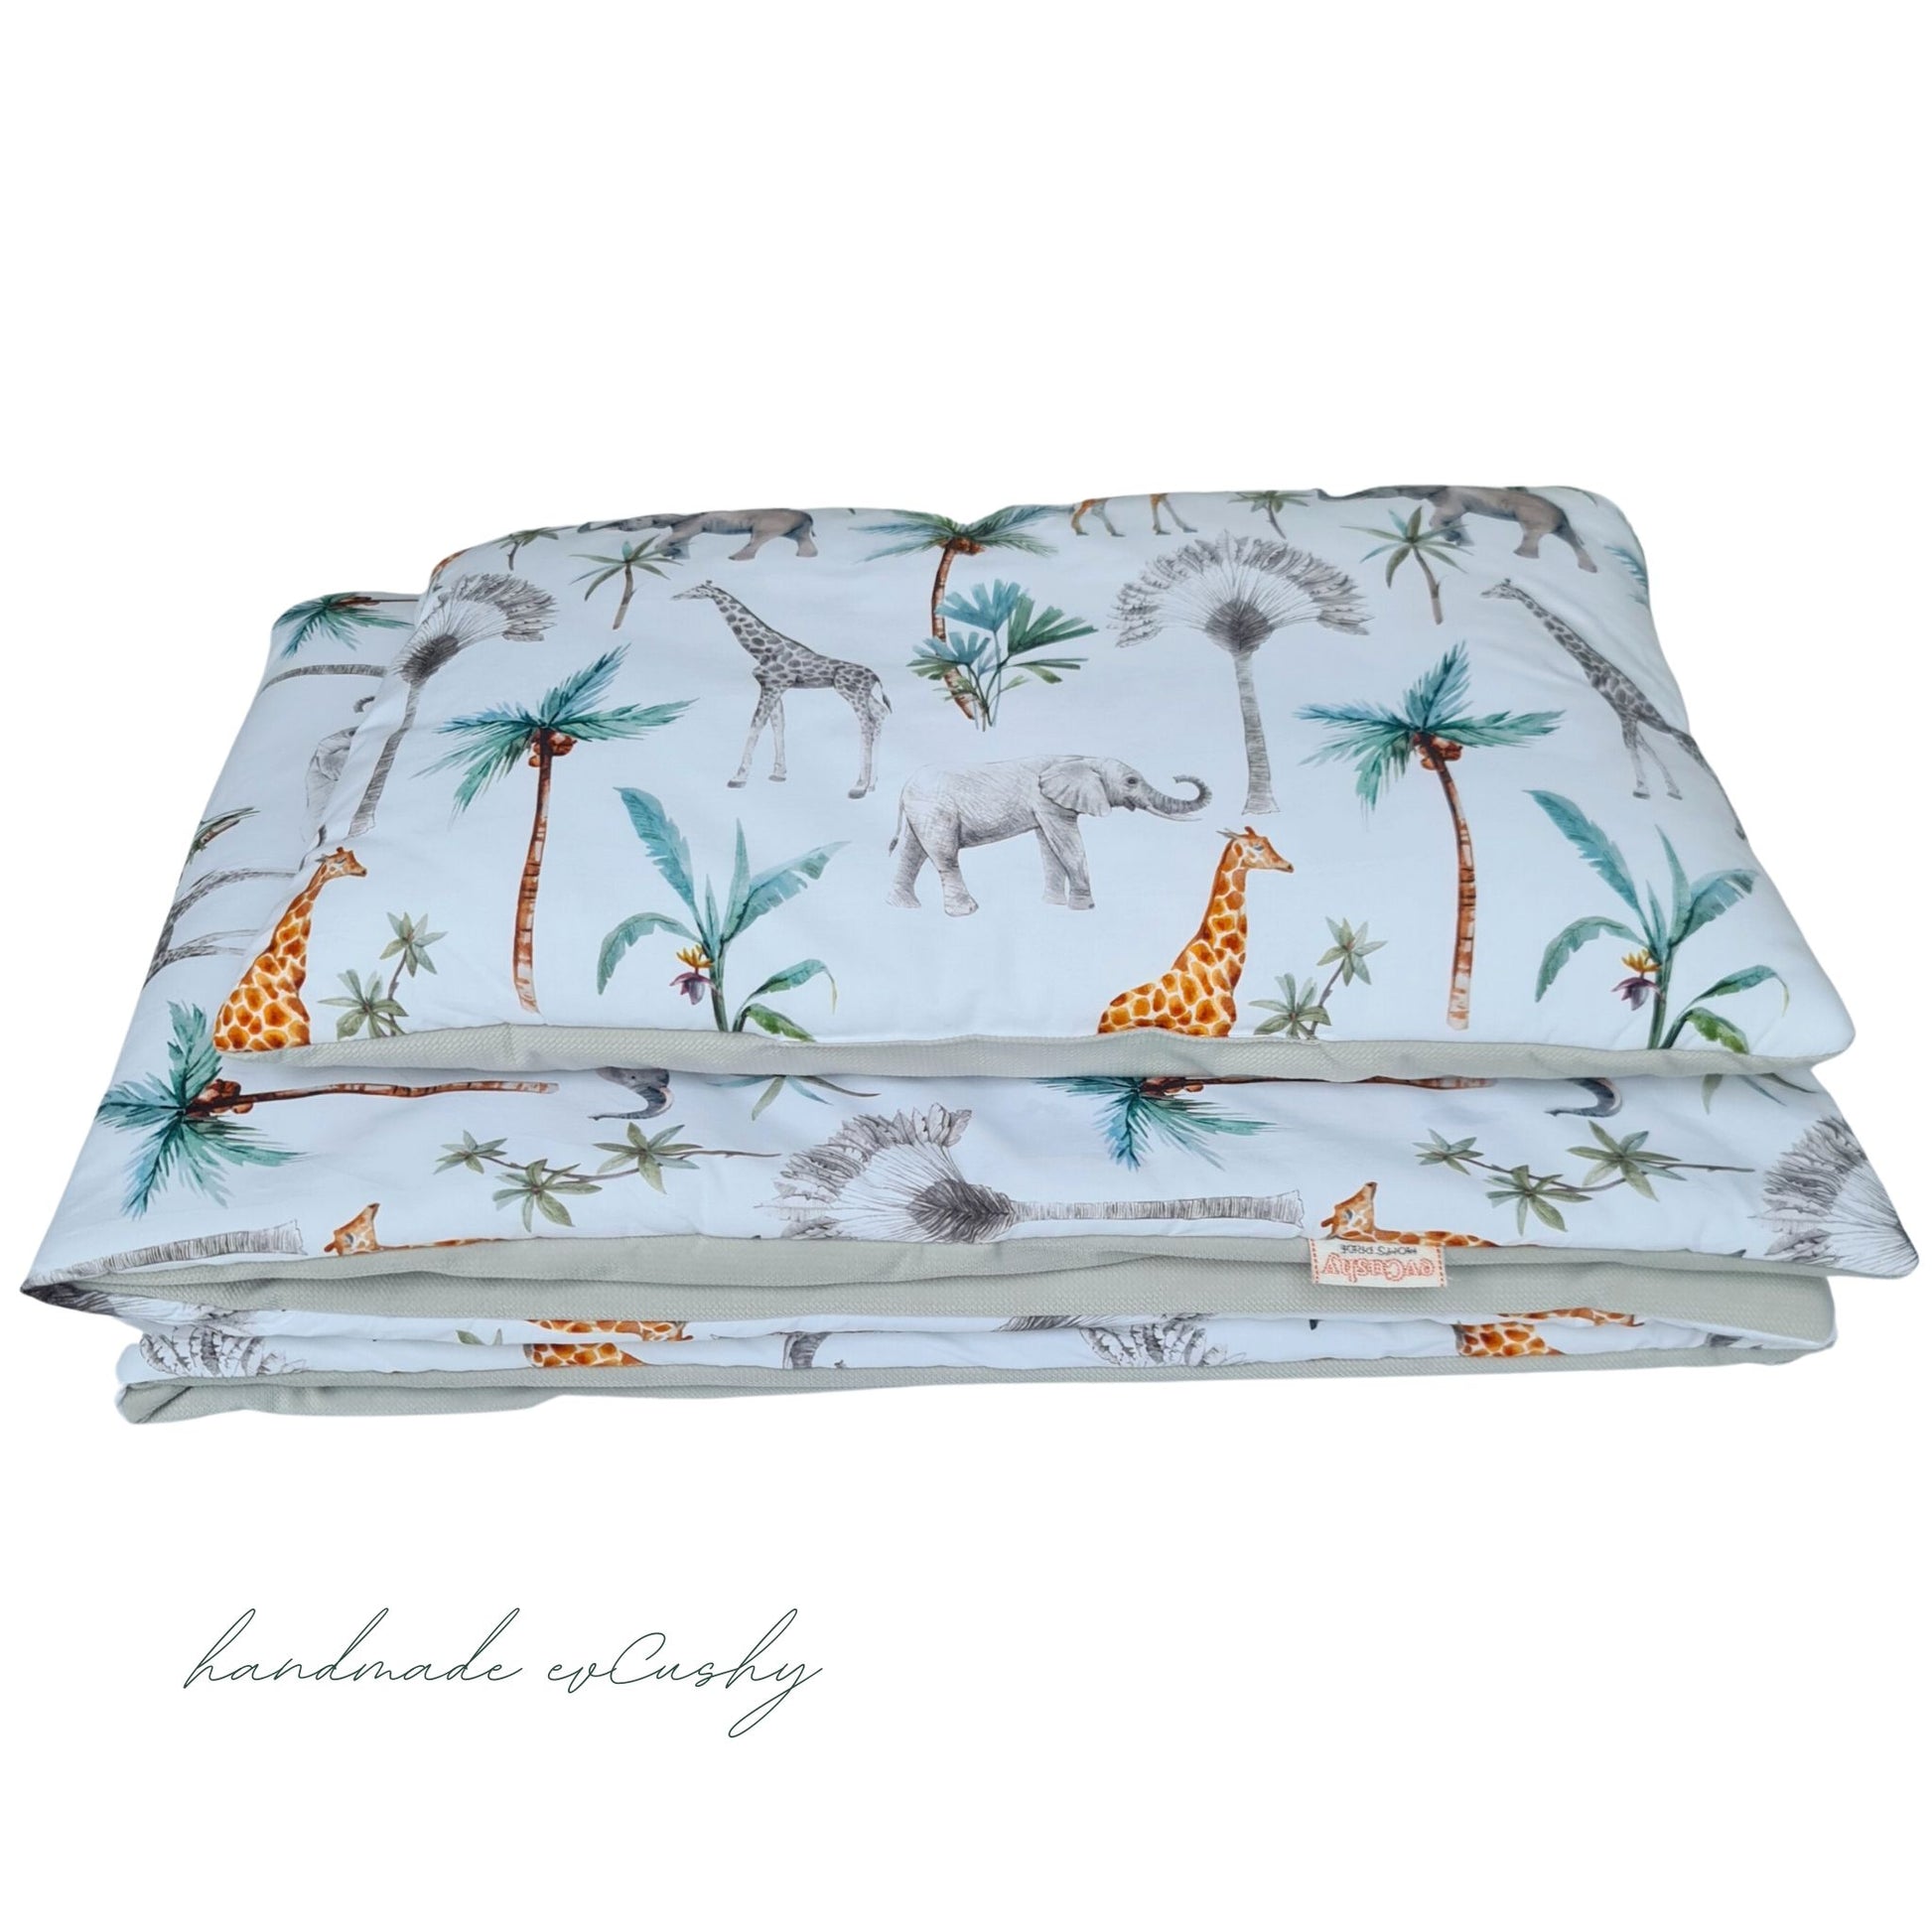 "Image of a charming two-tonal grey and safari-patterned toddler duvet and pillow set, designed to fit perfectly in a cot bed, providing a cozy and adventurous sleep environment."